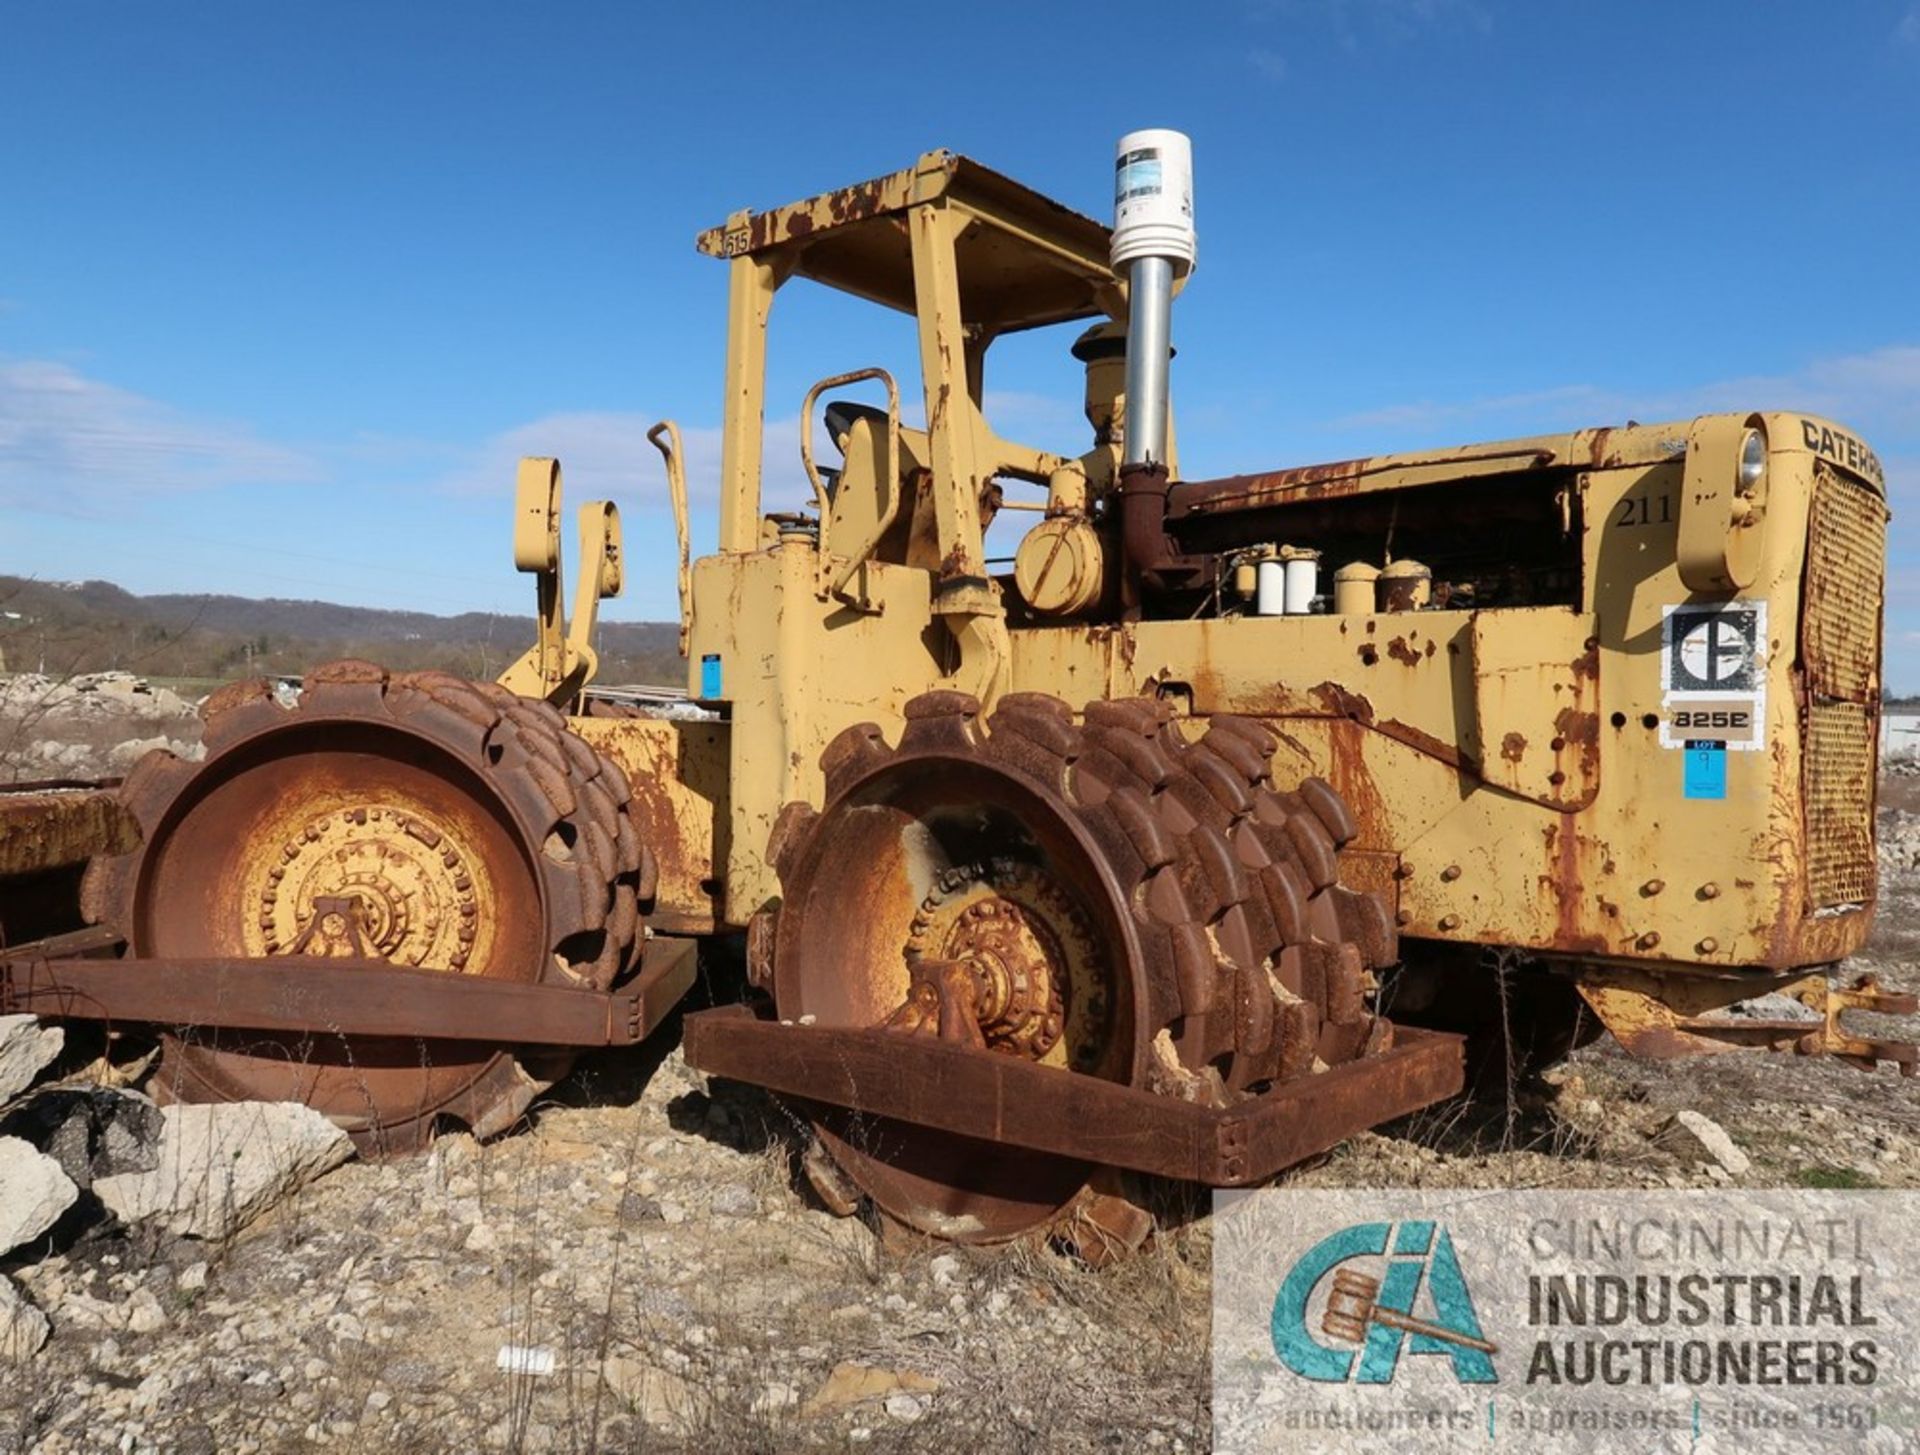 CATERPILLAR MODEL 825B SHEEPS FOOT COMPACTOR; S/N N/A (NEW 1973), 168" STRAIGHT BLADE, 46" WIDE